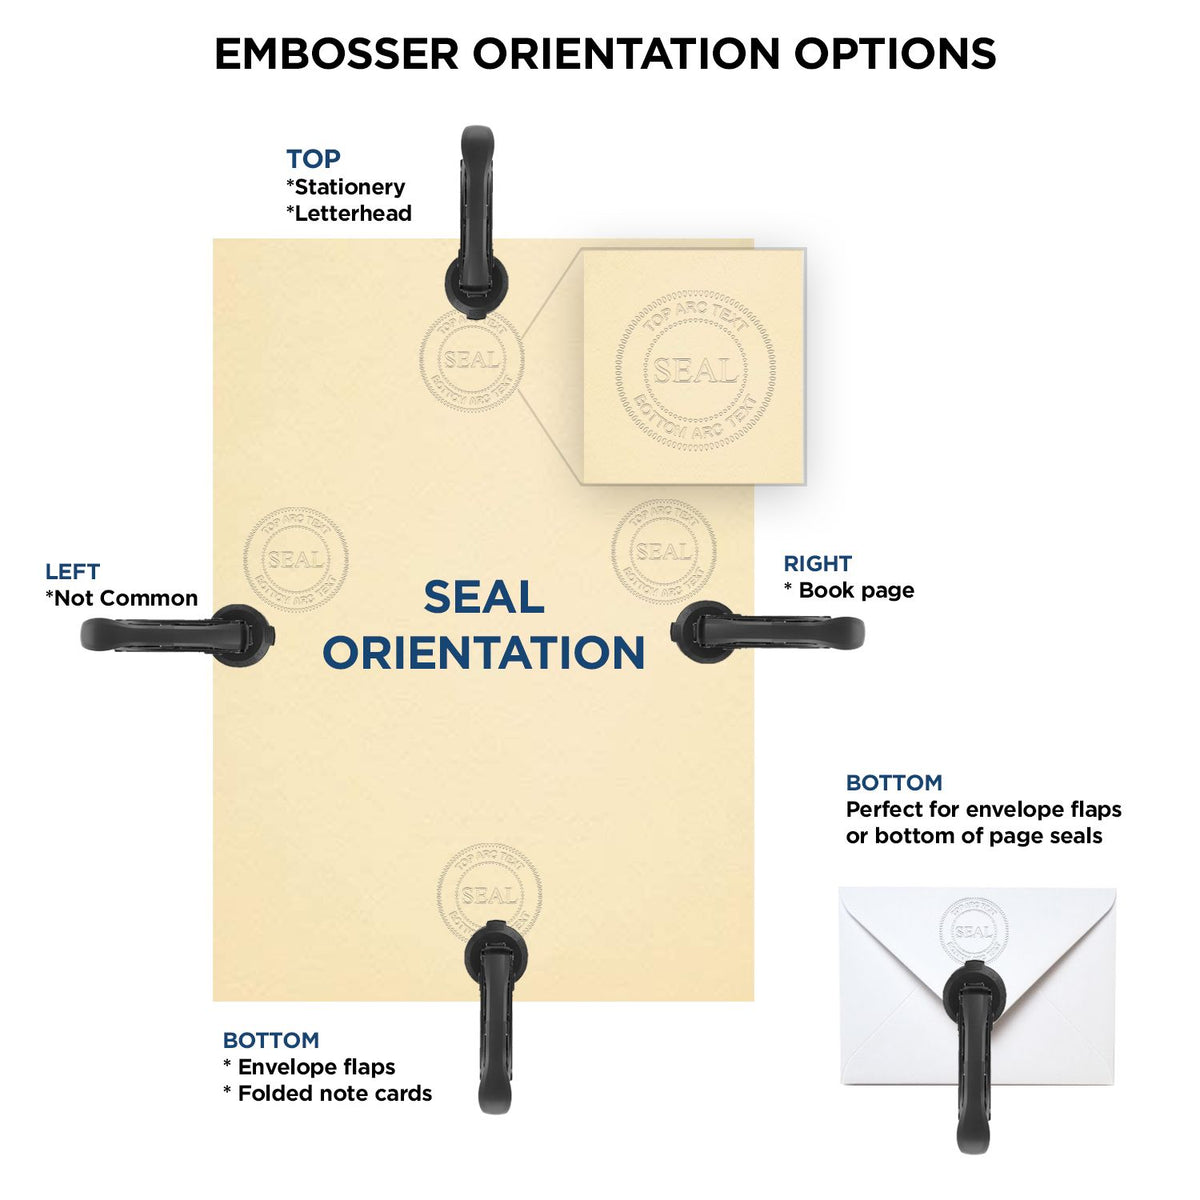 An infographic for the Gift New Mexico Land Surveyor Seal showing embosser orientation, this is showing examples of a top, bottom, right and left insert.